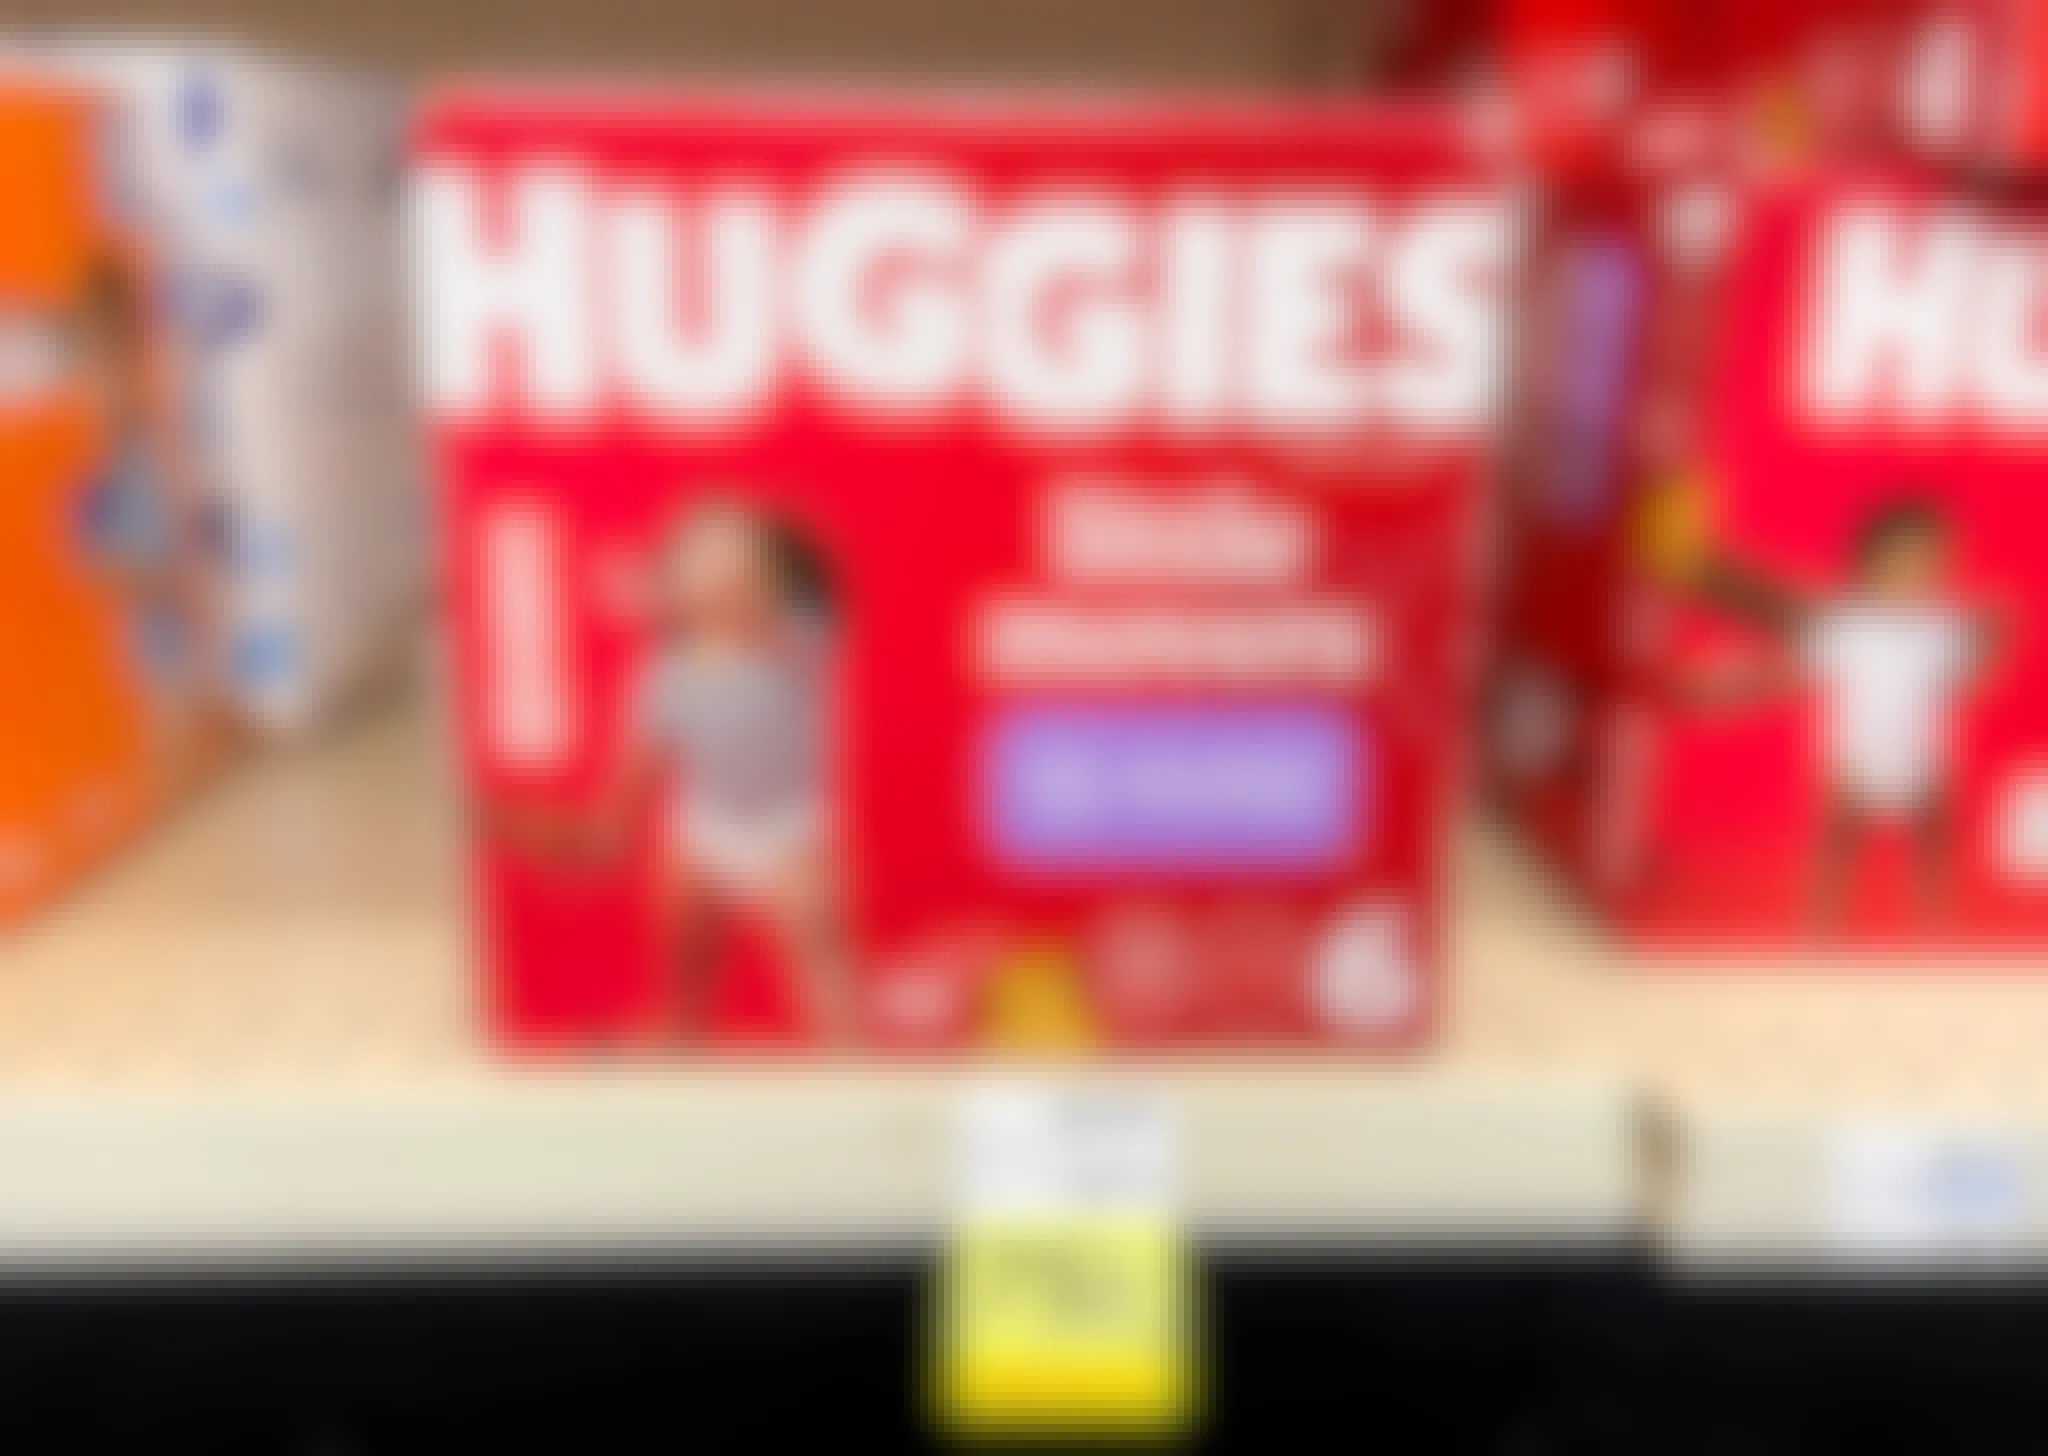 Huggies boxed diapers on shelf with yellow 75% off clearance tag